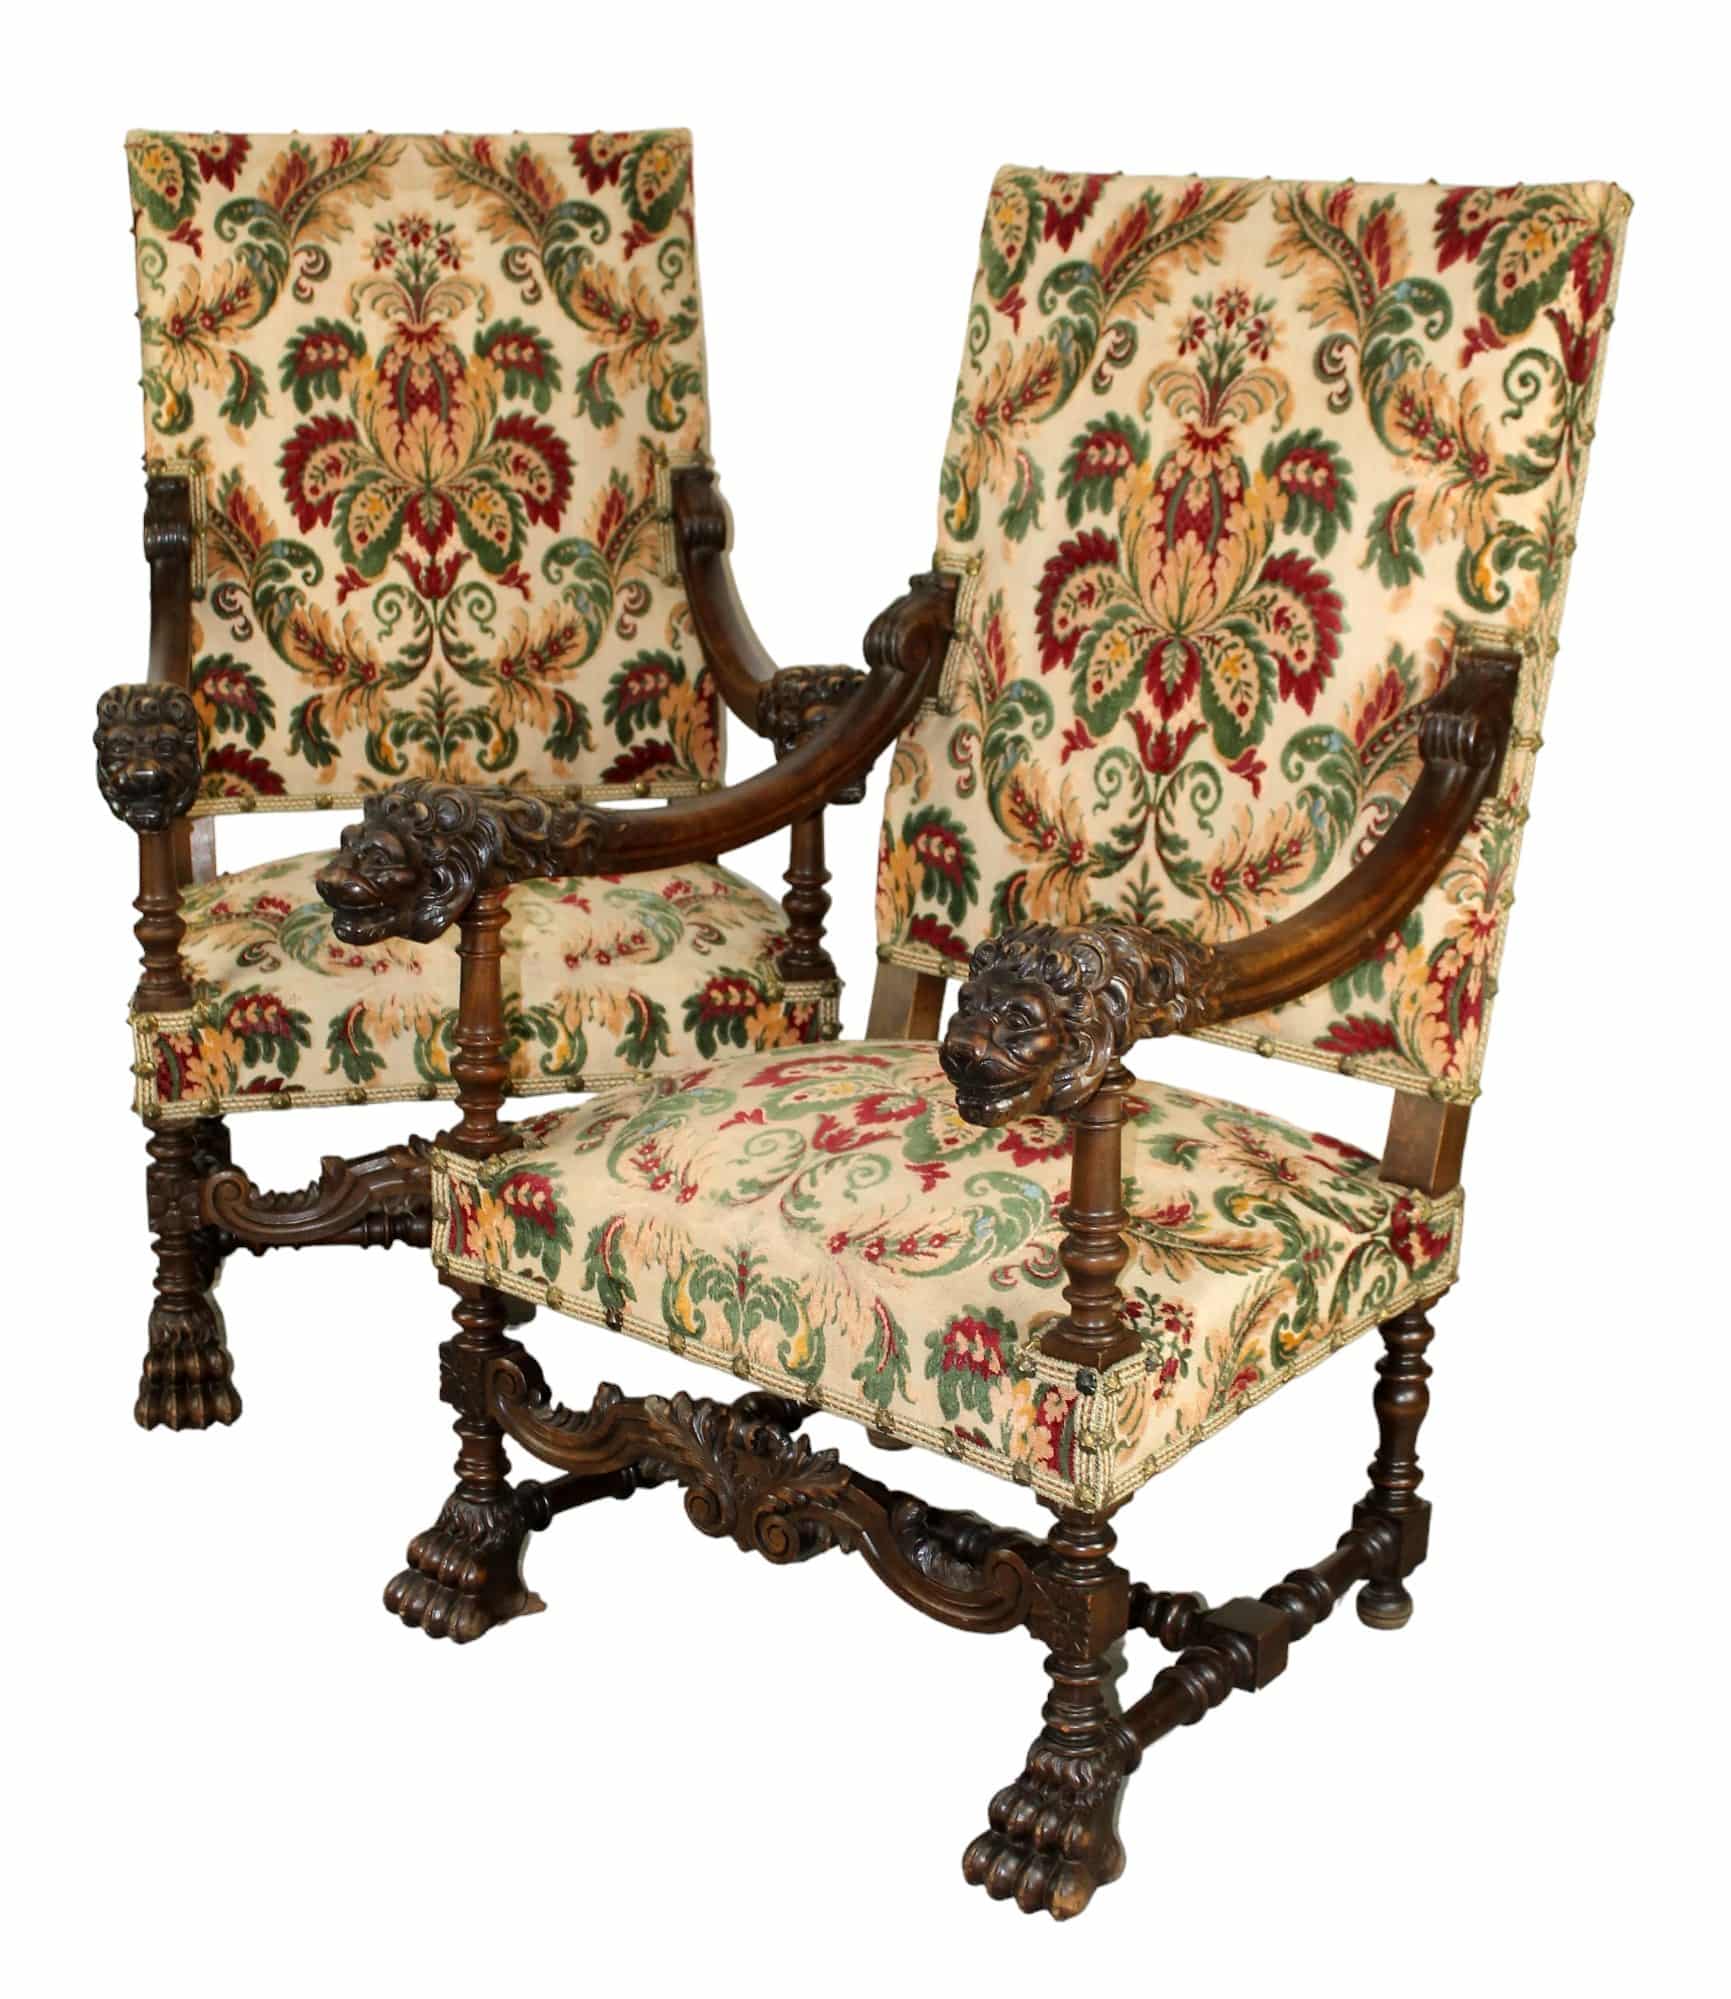 Pair of French fauteuil armchairs in walnut with carved lion heads and paw feet